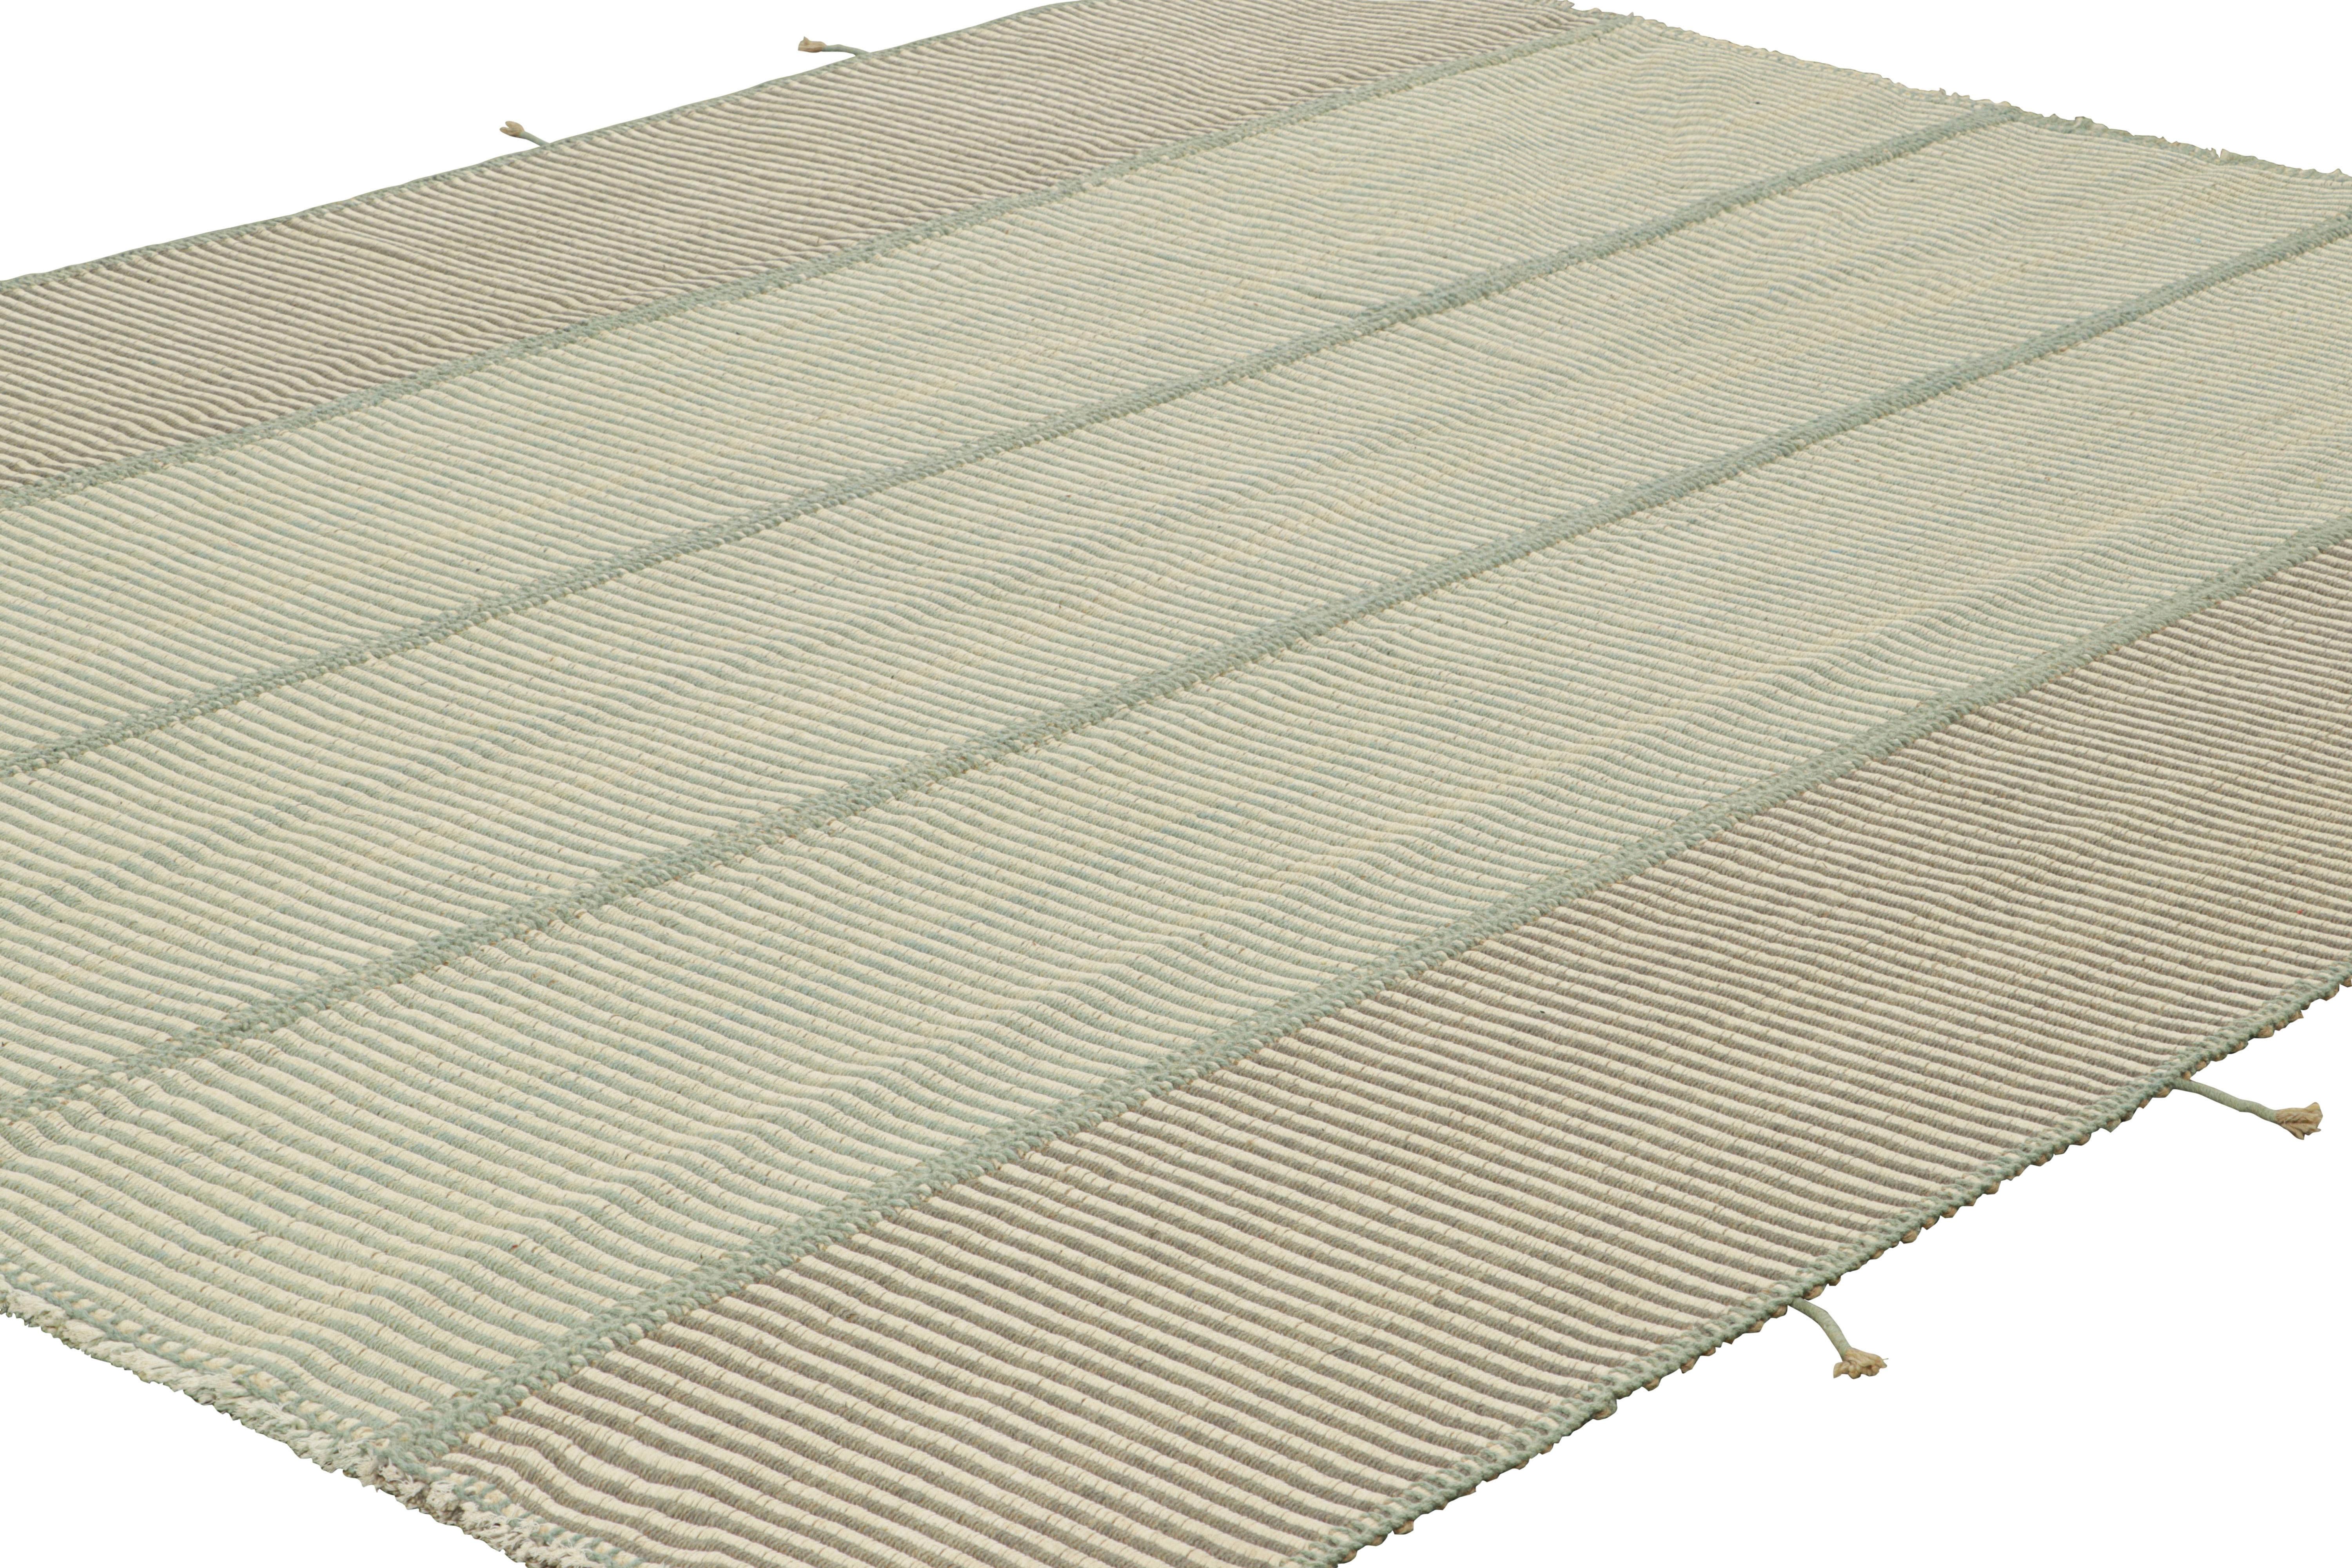 Afghan Rug & Kilim’s Contemporary Kilim in Cream and Blue Textural Stripes For Sale